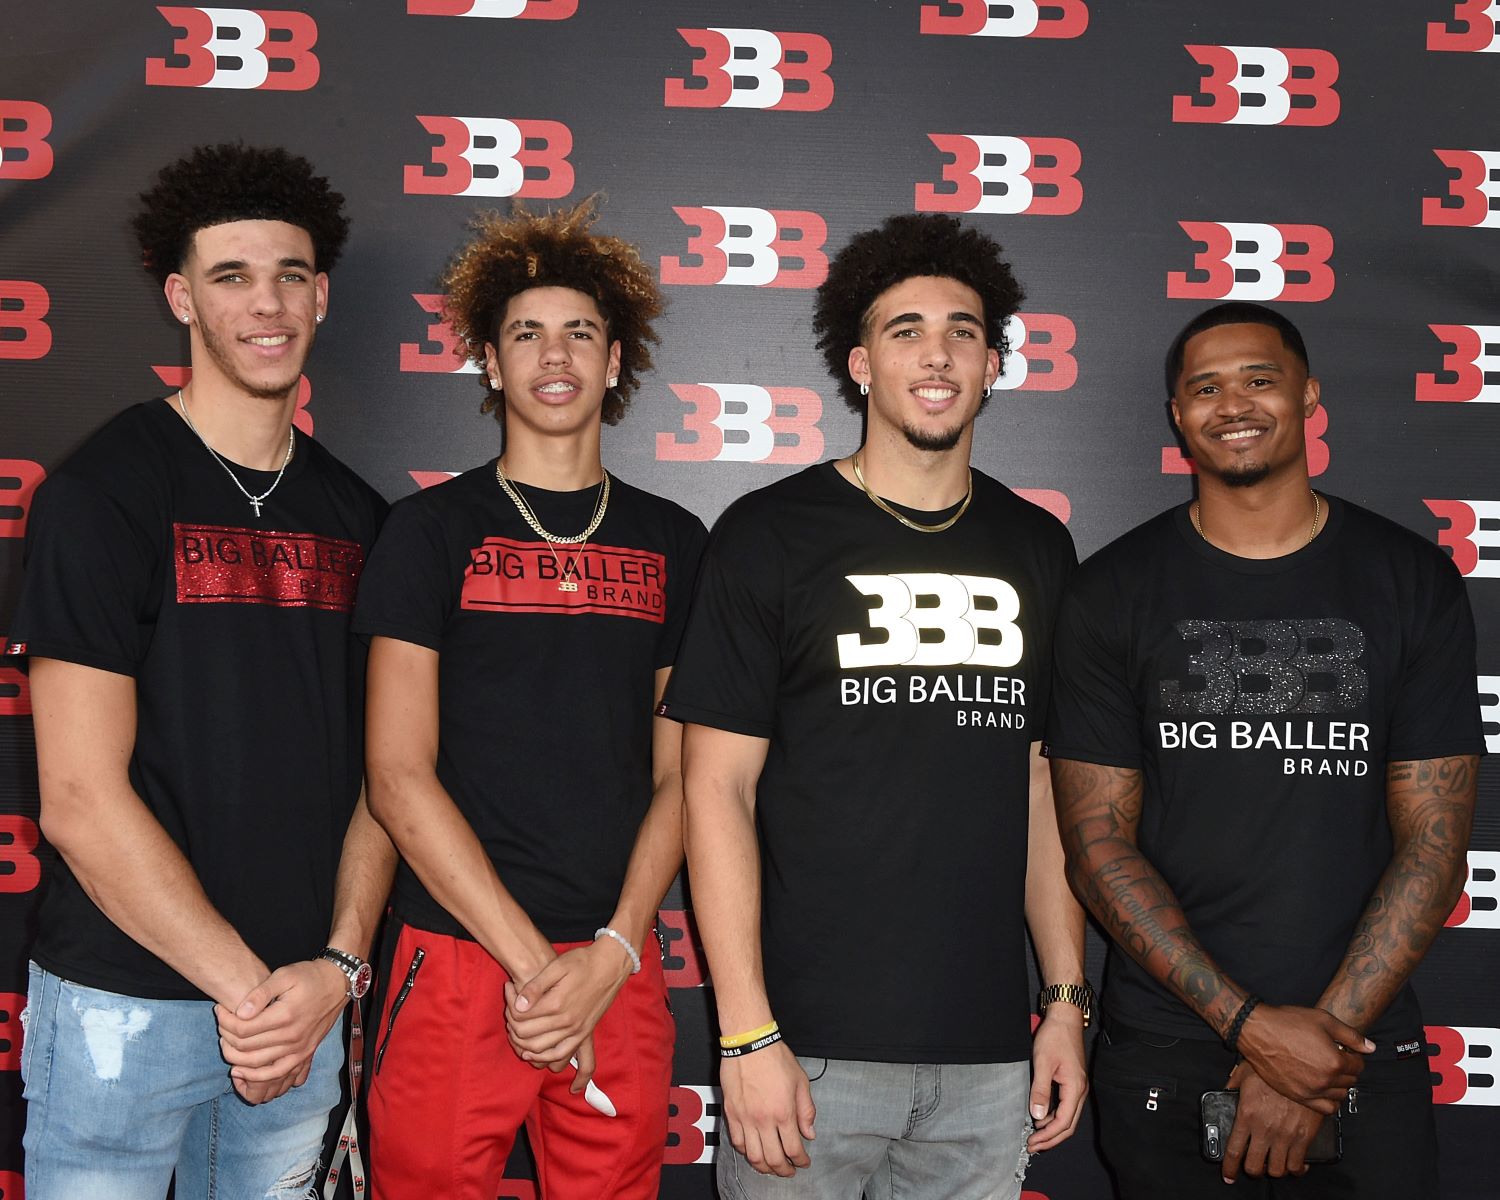 How Many Ball Brothers Are There?